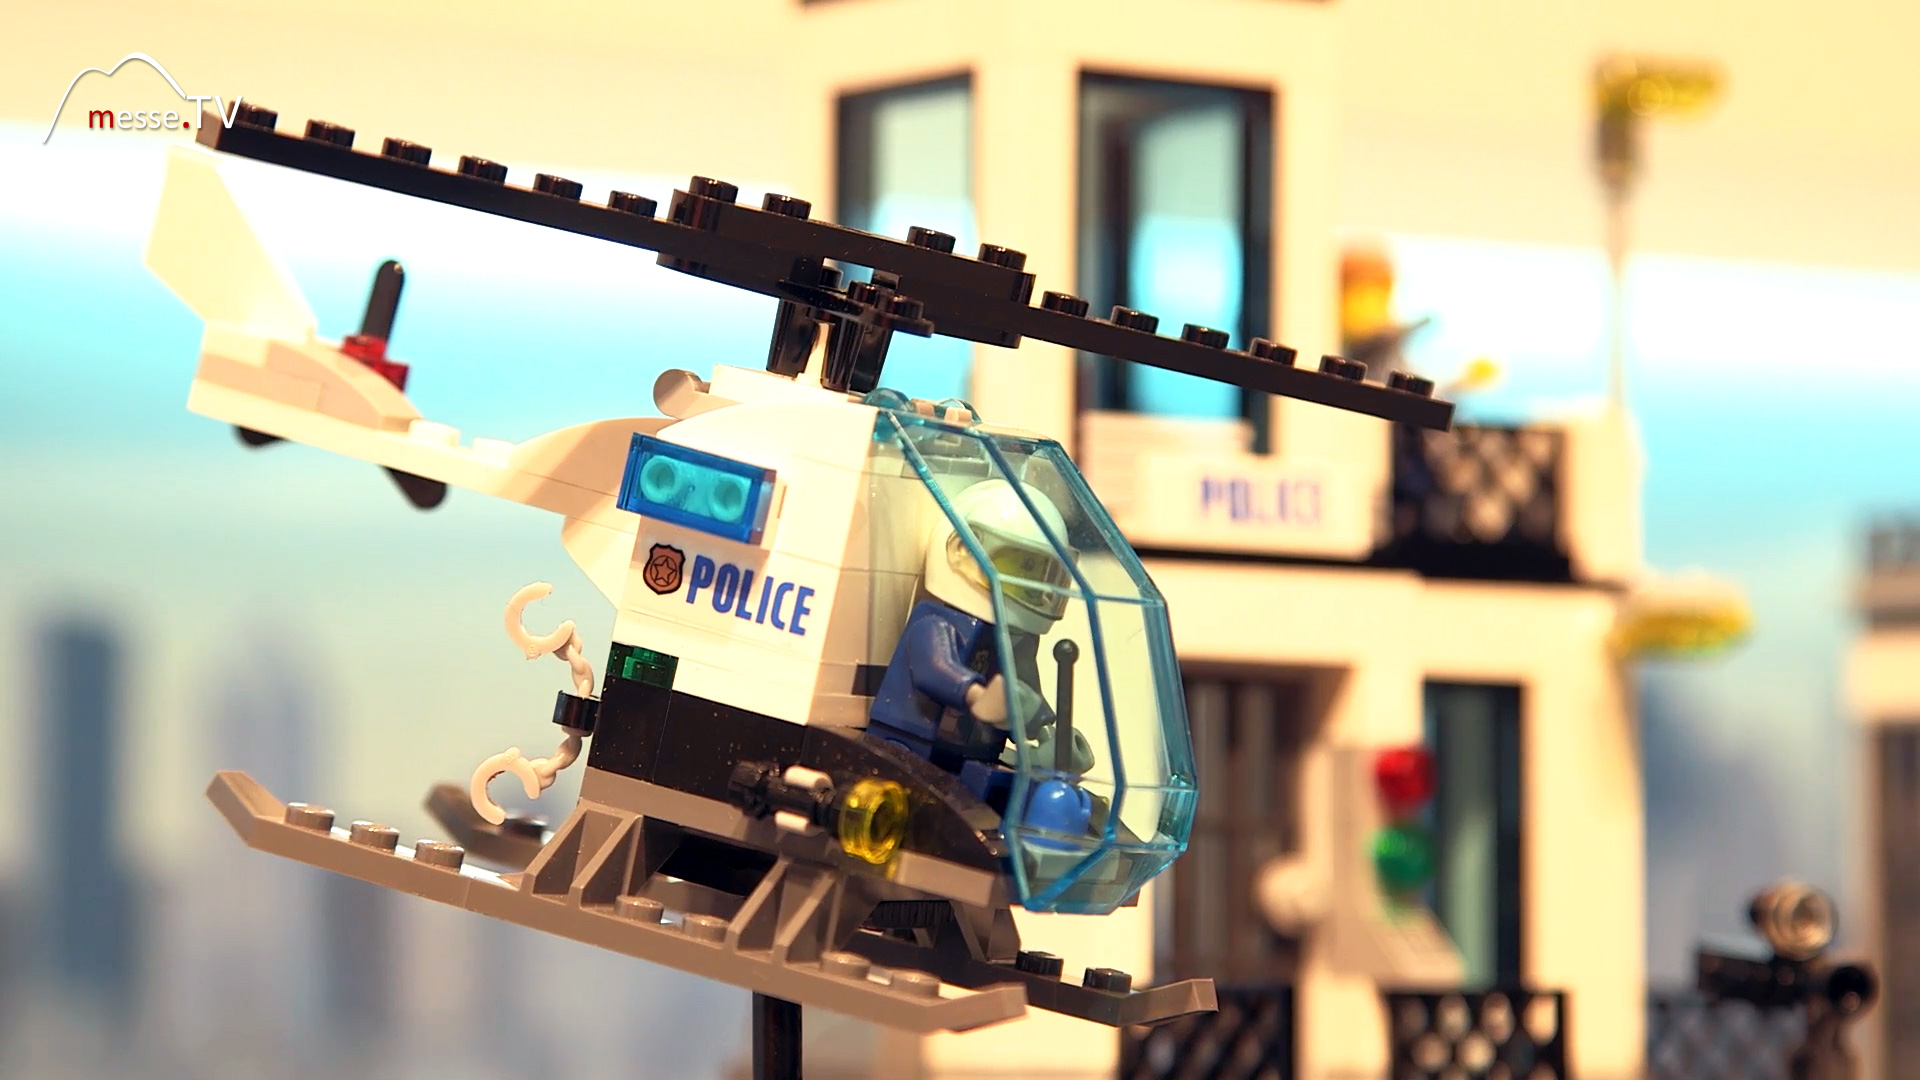 Police helicopter from LEGO